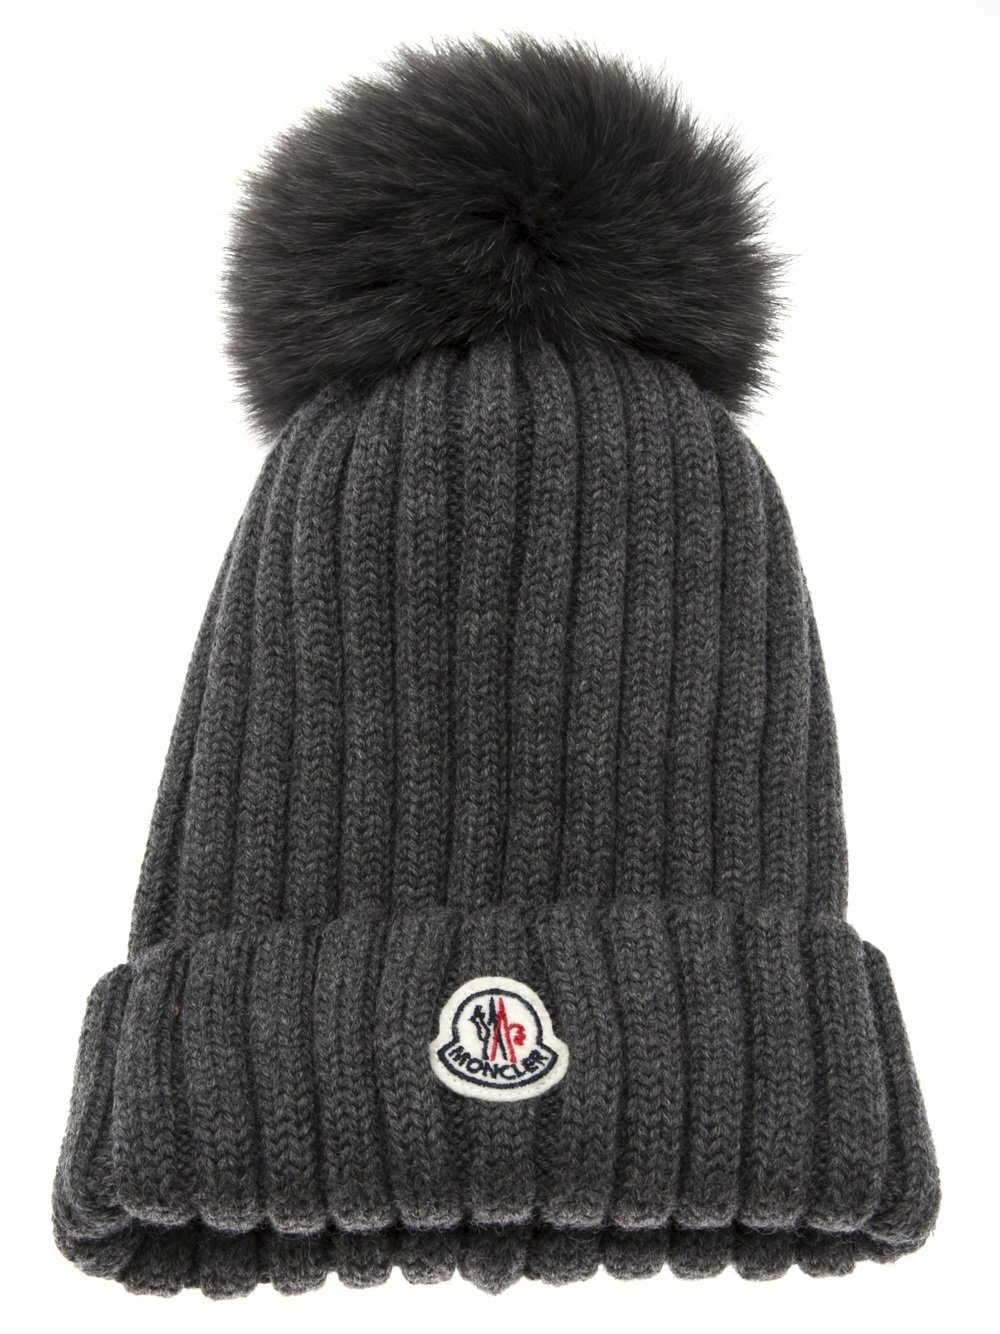 Lyst - Moncler Beanie Hat in Gray